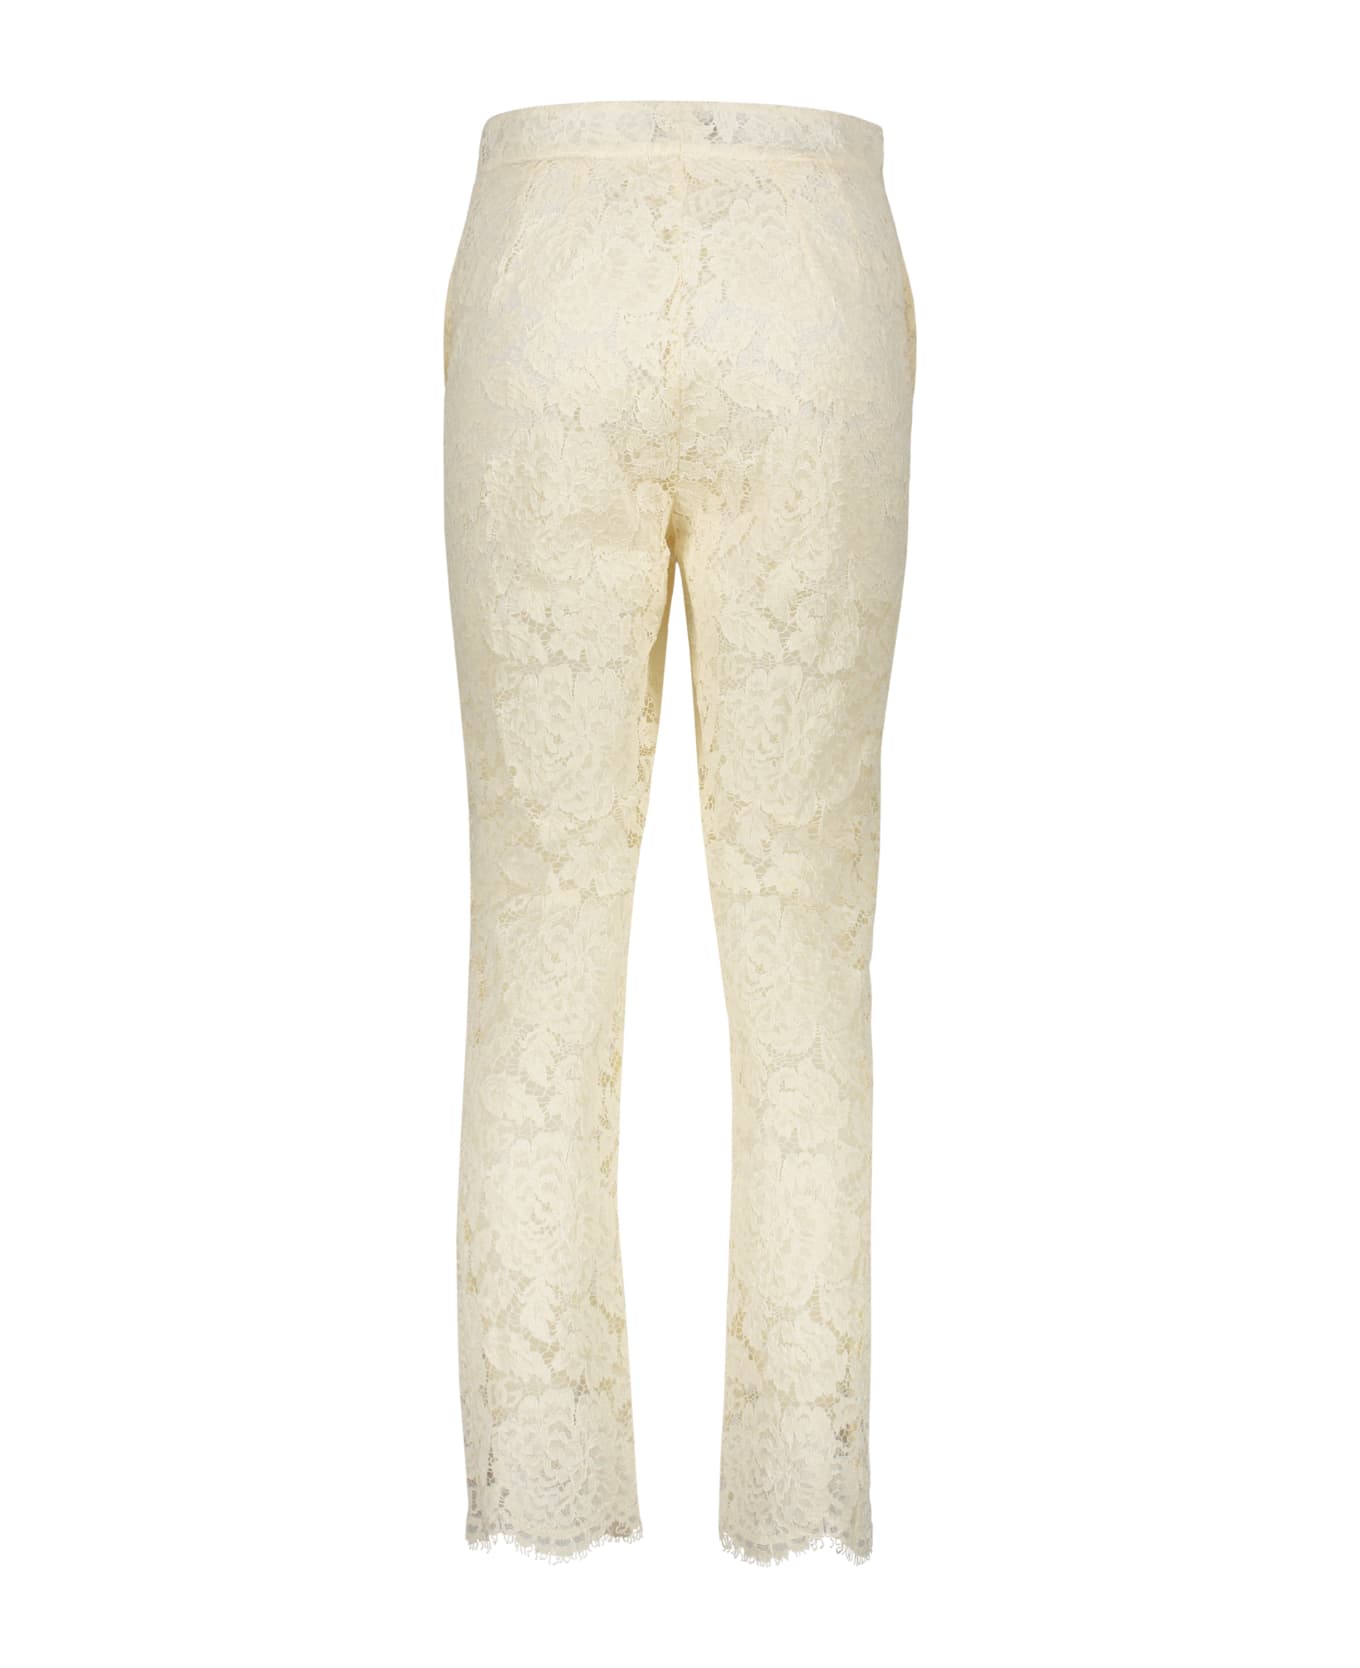 Dolce & Gabbana Lace Trousers - Ivory